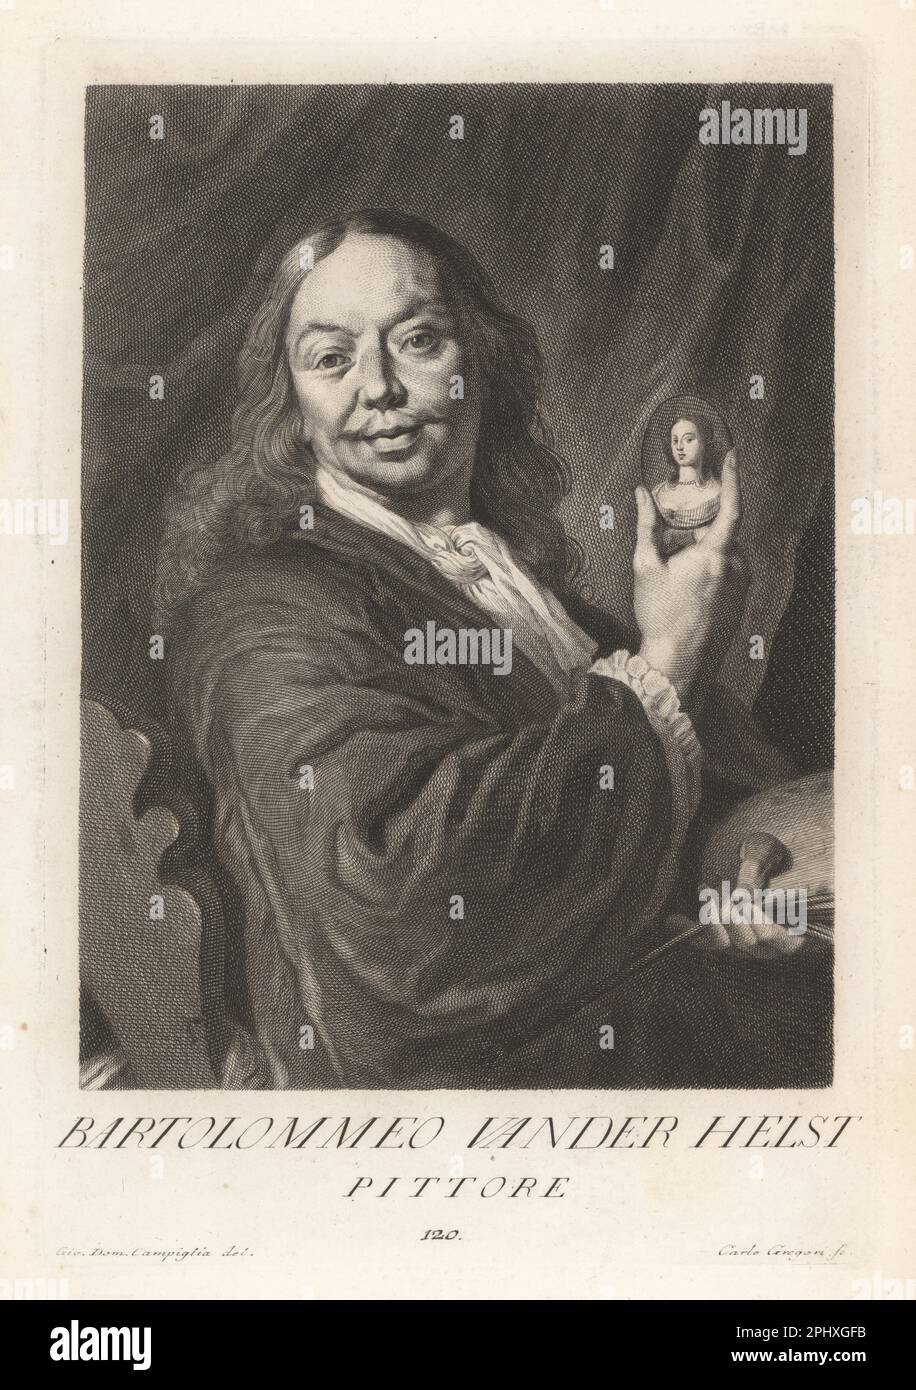 Bartholomeus van der Helst, Dutch painter, 1613-1670. One of the leading portrait painters of the Dutch Golden Age. Self portrait with paint brush and palette, holding a miniature portrait. Bartolommeo Vander Heist, Pittore. Copperplate engraving by Carlo Gregori after Giovanni Domenico Campiglia after a self portrait by the artist from Francesco Moucke's Museo Florentino (Museum Florentinum), Serie di Ritratti de Pittori (Series of Portraits of Painters) stamperia Mouckiana, Florence, 1752-62. Stock Photo